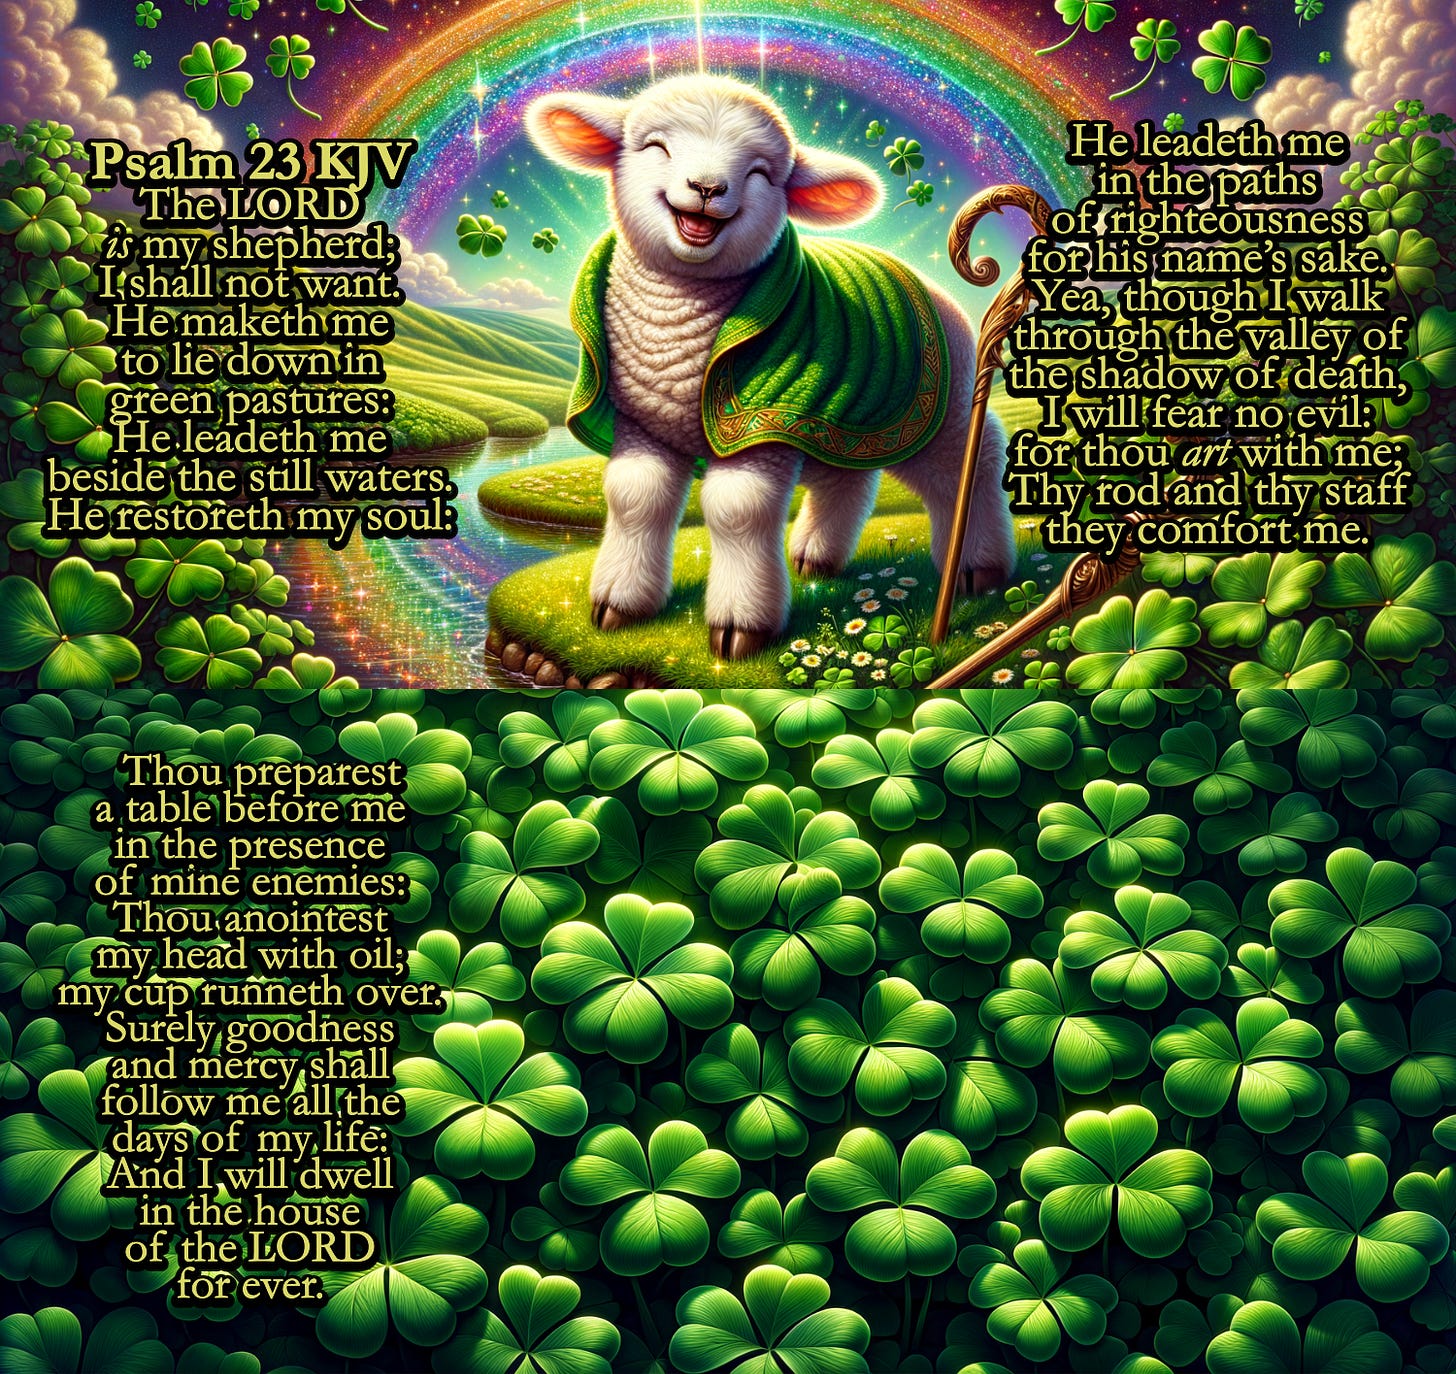 This is a vibrant and detailed image with multiple elements that combine both graphic and text elements to create a harmonious composition.  At the center, there is an anthropomorphic lamb standing on its hind legs, facing the viewer with a joyful expression, eyes closed, and a wide smile. The lamb is wearing a green cloak with intricate golden designs that suggest a luxurious texture. The cloak drapes over the lamb's back and appears soft and velvety.  The lamb is positioned on a mossy rock surrounded by lush greenery. The greenery is predominantly composed of shamrocks, with their leaves in sets of three, which cover the bottom third of the image densely. The shamrocks have a gradient of green shades, giving them a natural and three-dimensional look.  Behind the lamb, there is a radiant, circular rainbow that creates a halo effect. The rainbow is a spectrum of colors, transitioning smoothly from one to the next, and it adds a magical or divine quality to the scene.  The background depicts a pastoral landscape with rolling green hills under a bright blue sky filled with fluffy clouds. The hills are dotted with trees, and the sky gradient suggests it might be early morning or late afternoon.  Overlaying the image are sections of text, which appear to be an excerpt from Psalm 23 from the King James Version of the Bible. The text is arranged in an arch around the top and sides of the image, framing it. It is presented in a stylized, decorative font that resembles traditional calligraphy, enhancing the spiritual theme of the artwork.  The color palette is rich in greens and blues, with highlights of gold from the cloak and the text, which lends the image a peaceful and uplifting atmosphere. The overall effect is one of tranquility and comfort, likely designed to evoke the themes of guidance and protection referenced in the Psalm.